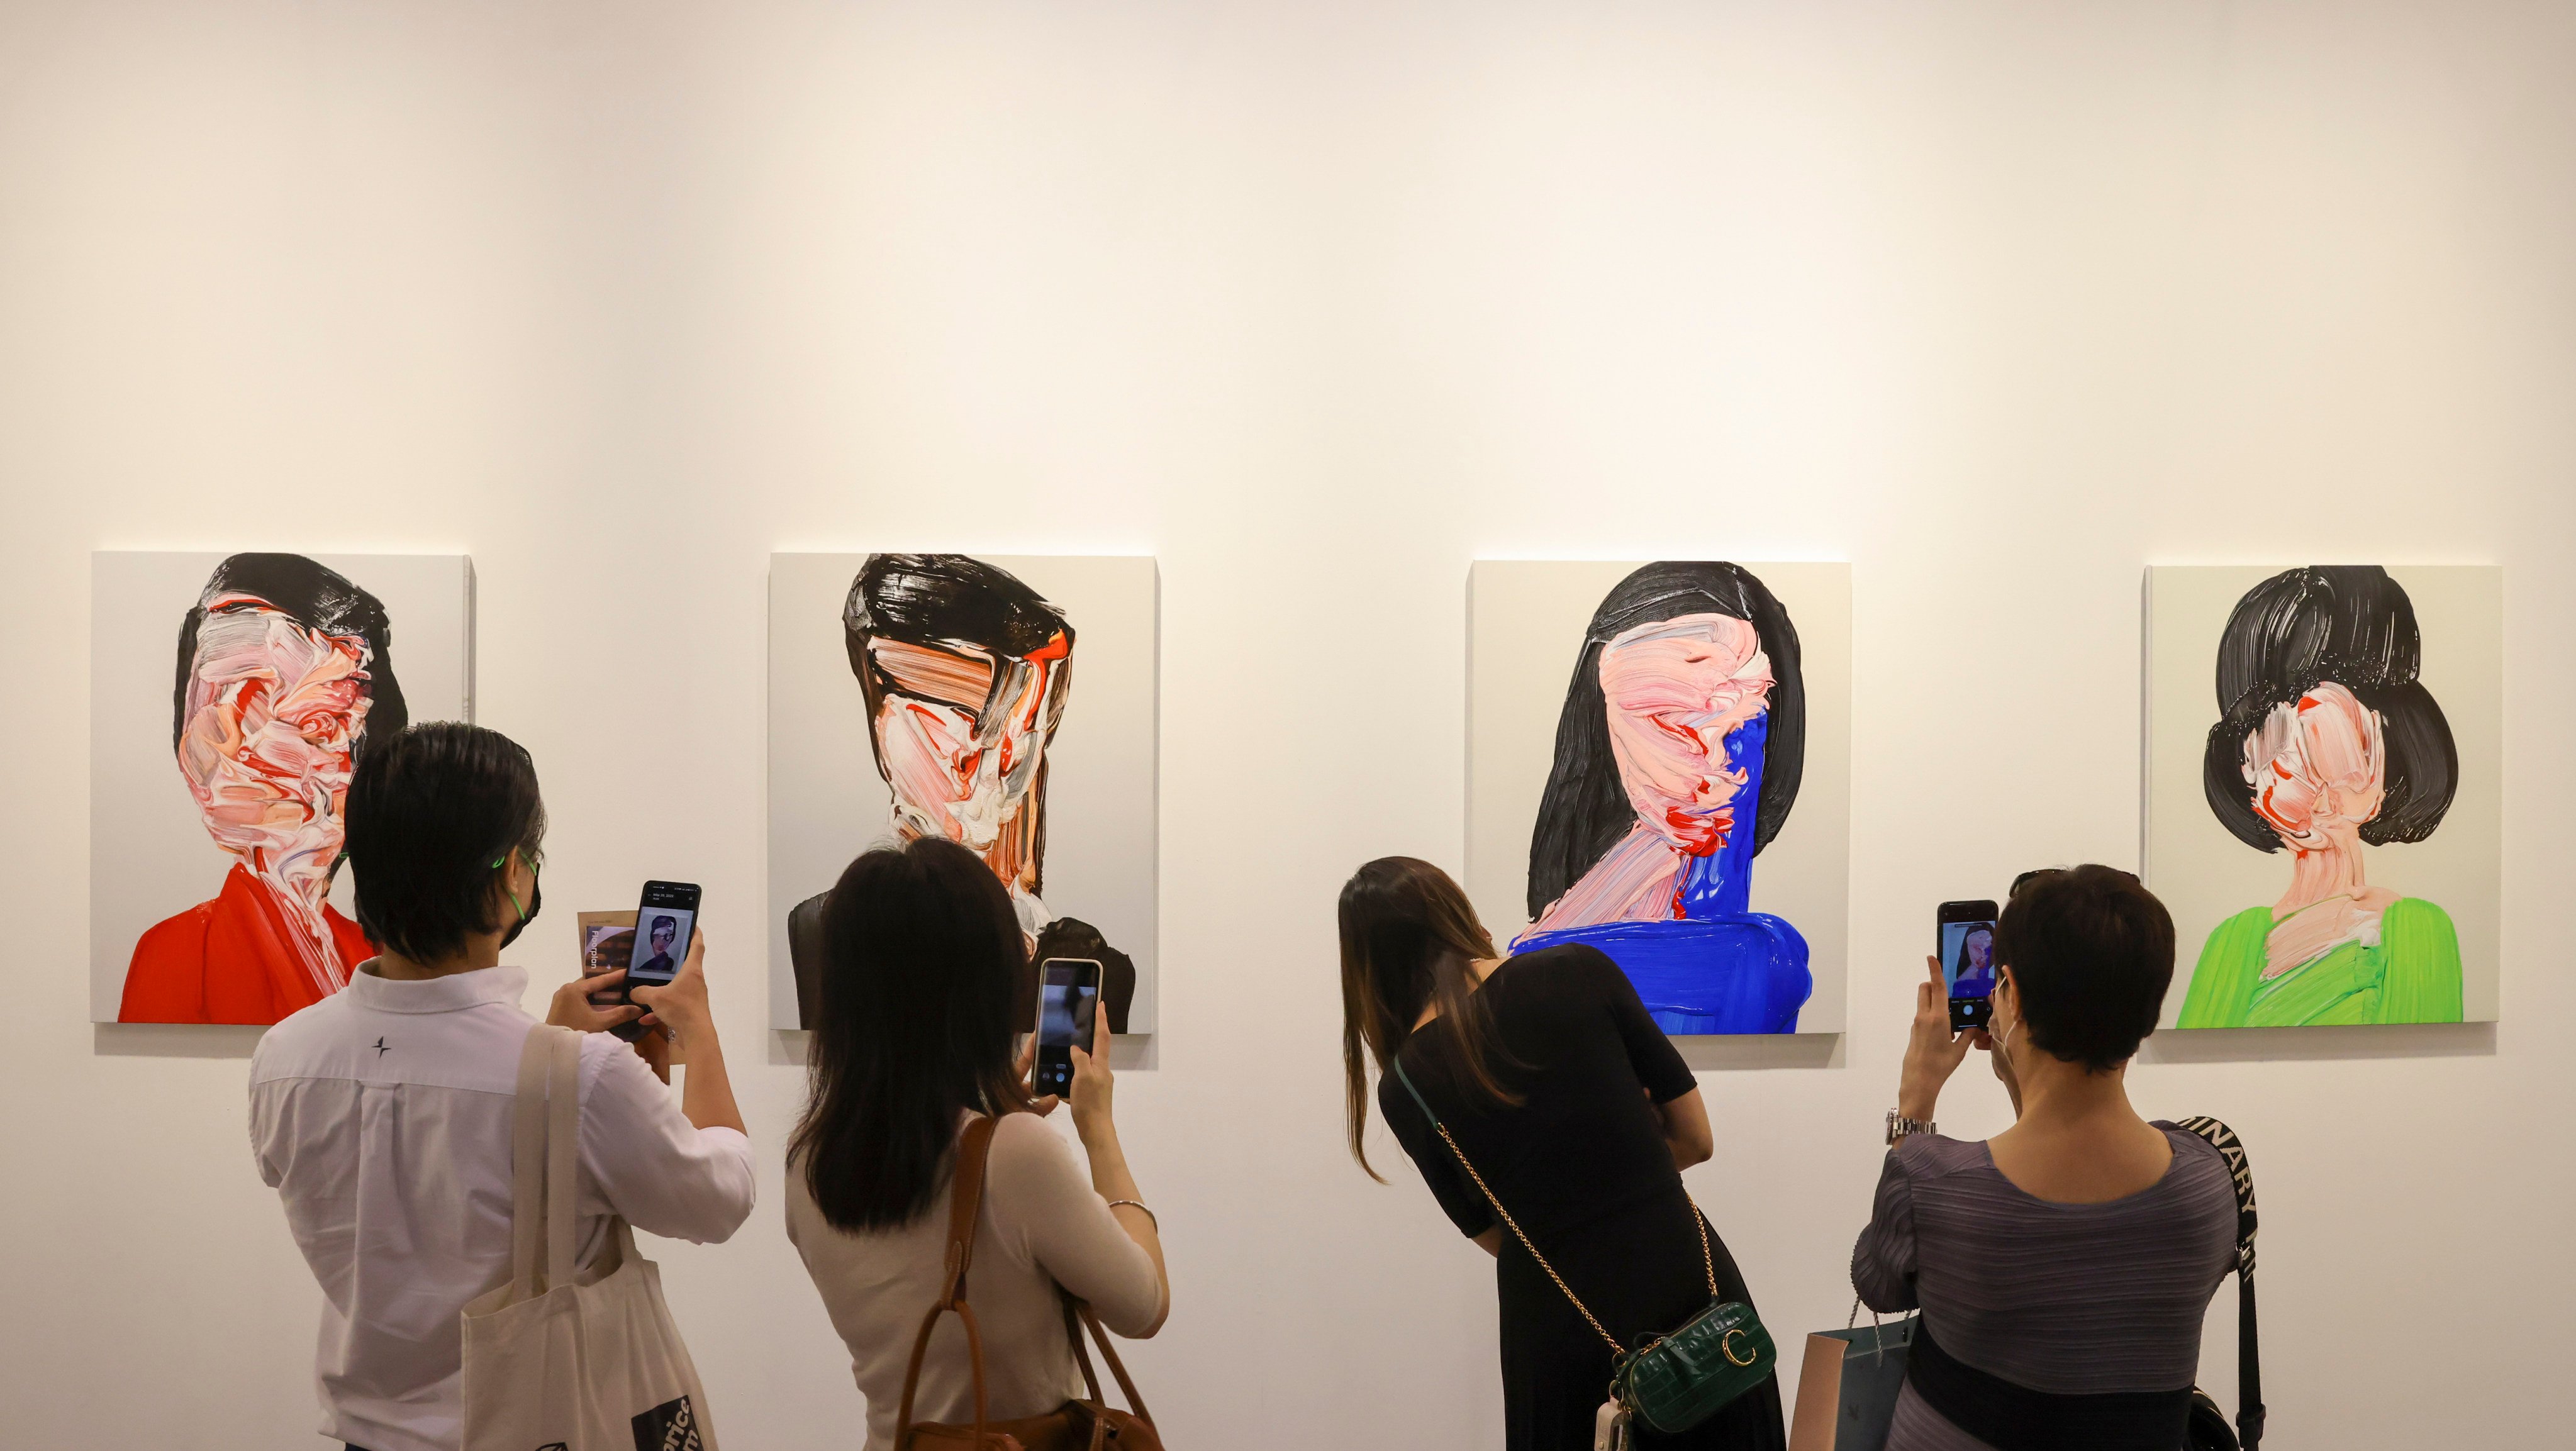 It’s no question that Instagram has given rise to some of today’s biggest stars from different industries – so how do visual artists leverage the mega platform? Photo: Noram tam